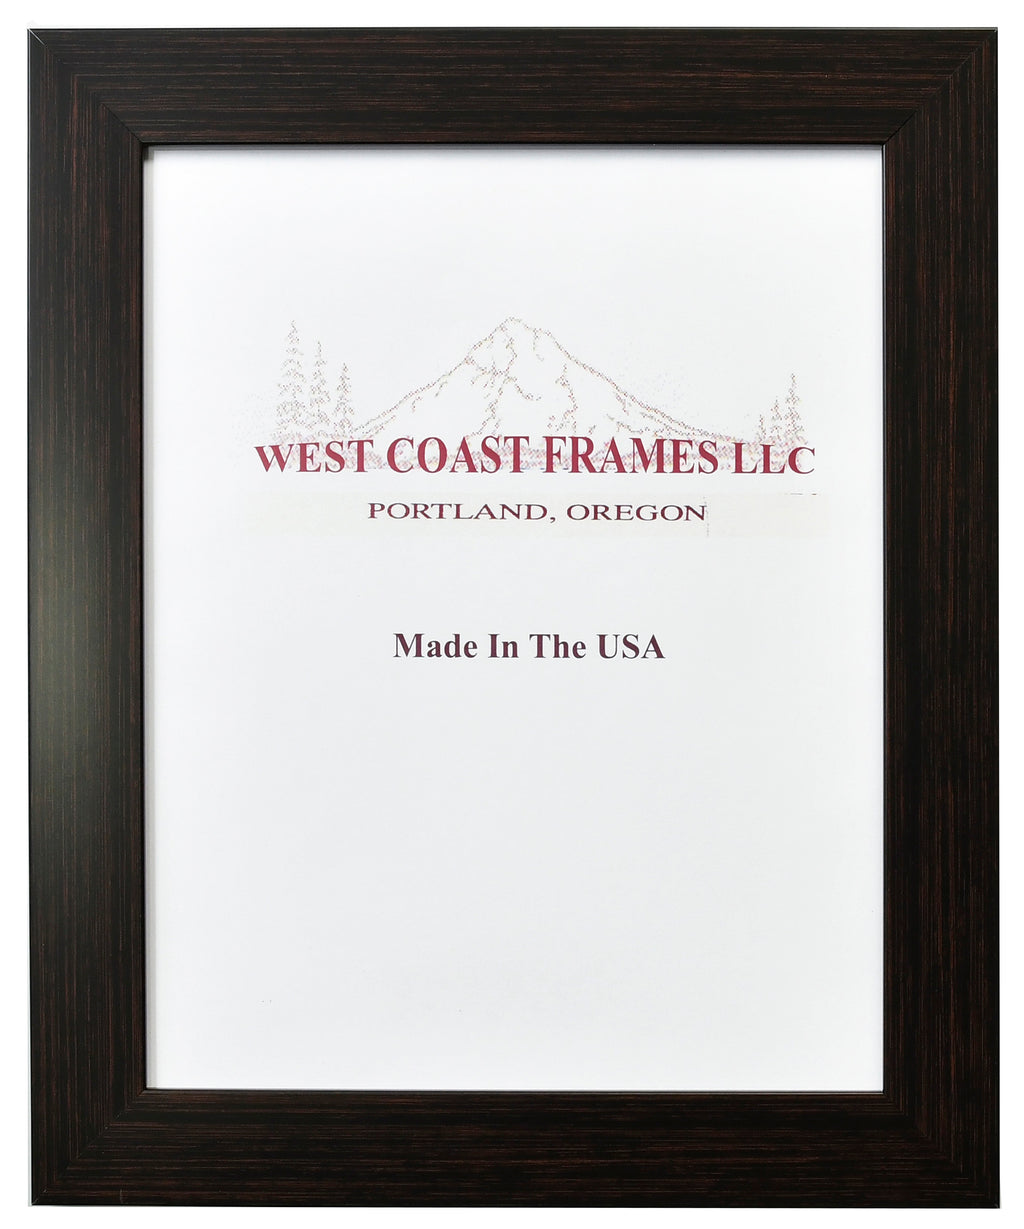 Espresso Walnut Picture Frame - 1-1/4" wide moulding - Clear Glass - 51651